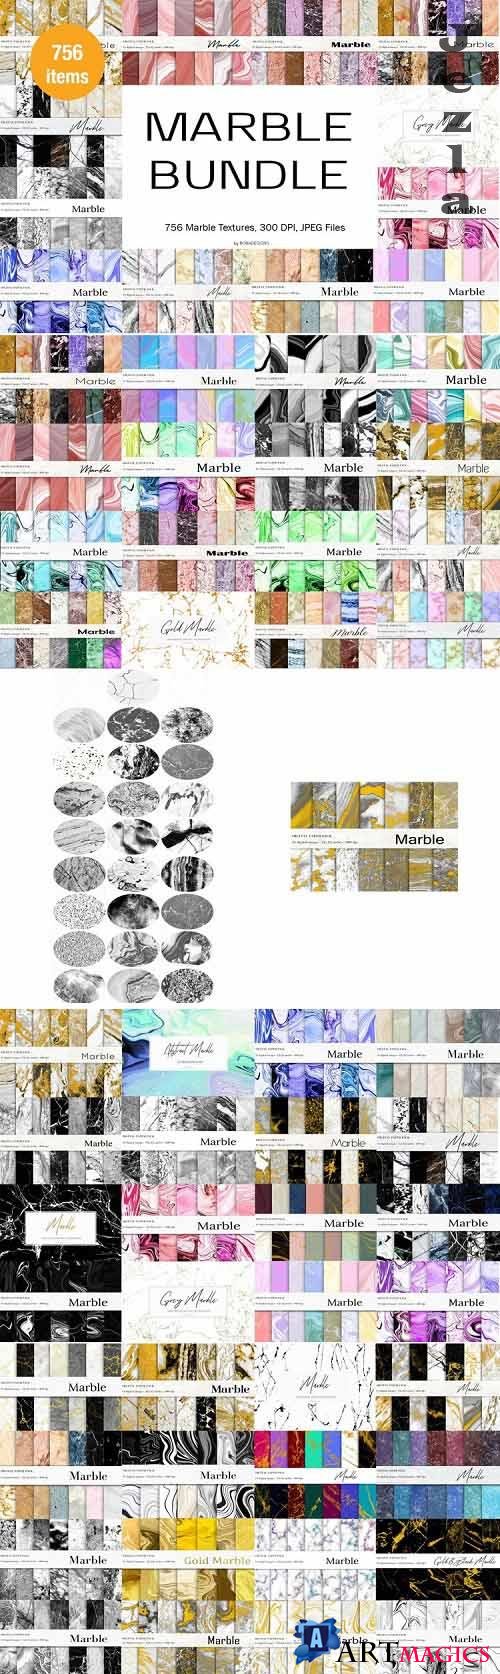 Marble Textures Bundle, Marble Backgrounds - 1133473